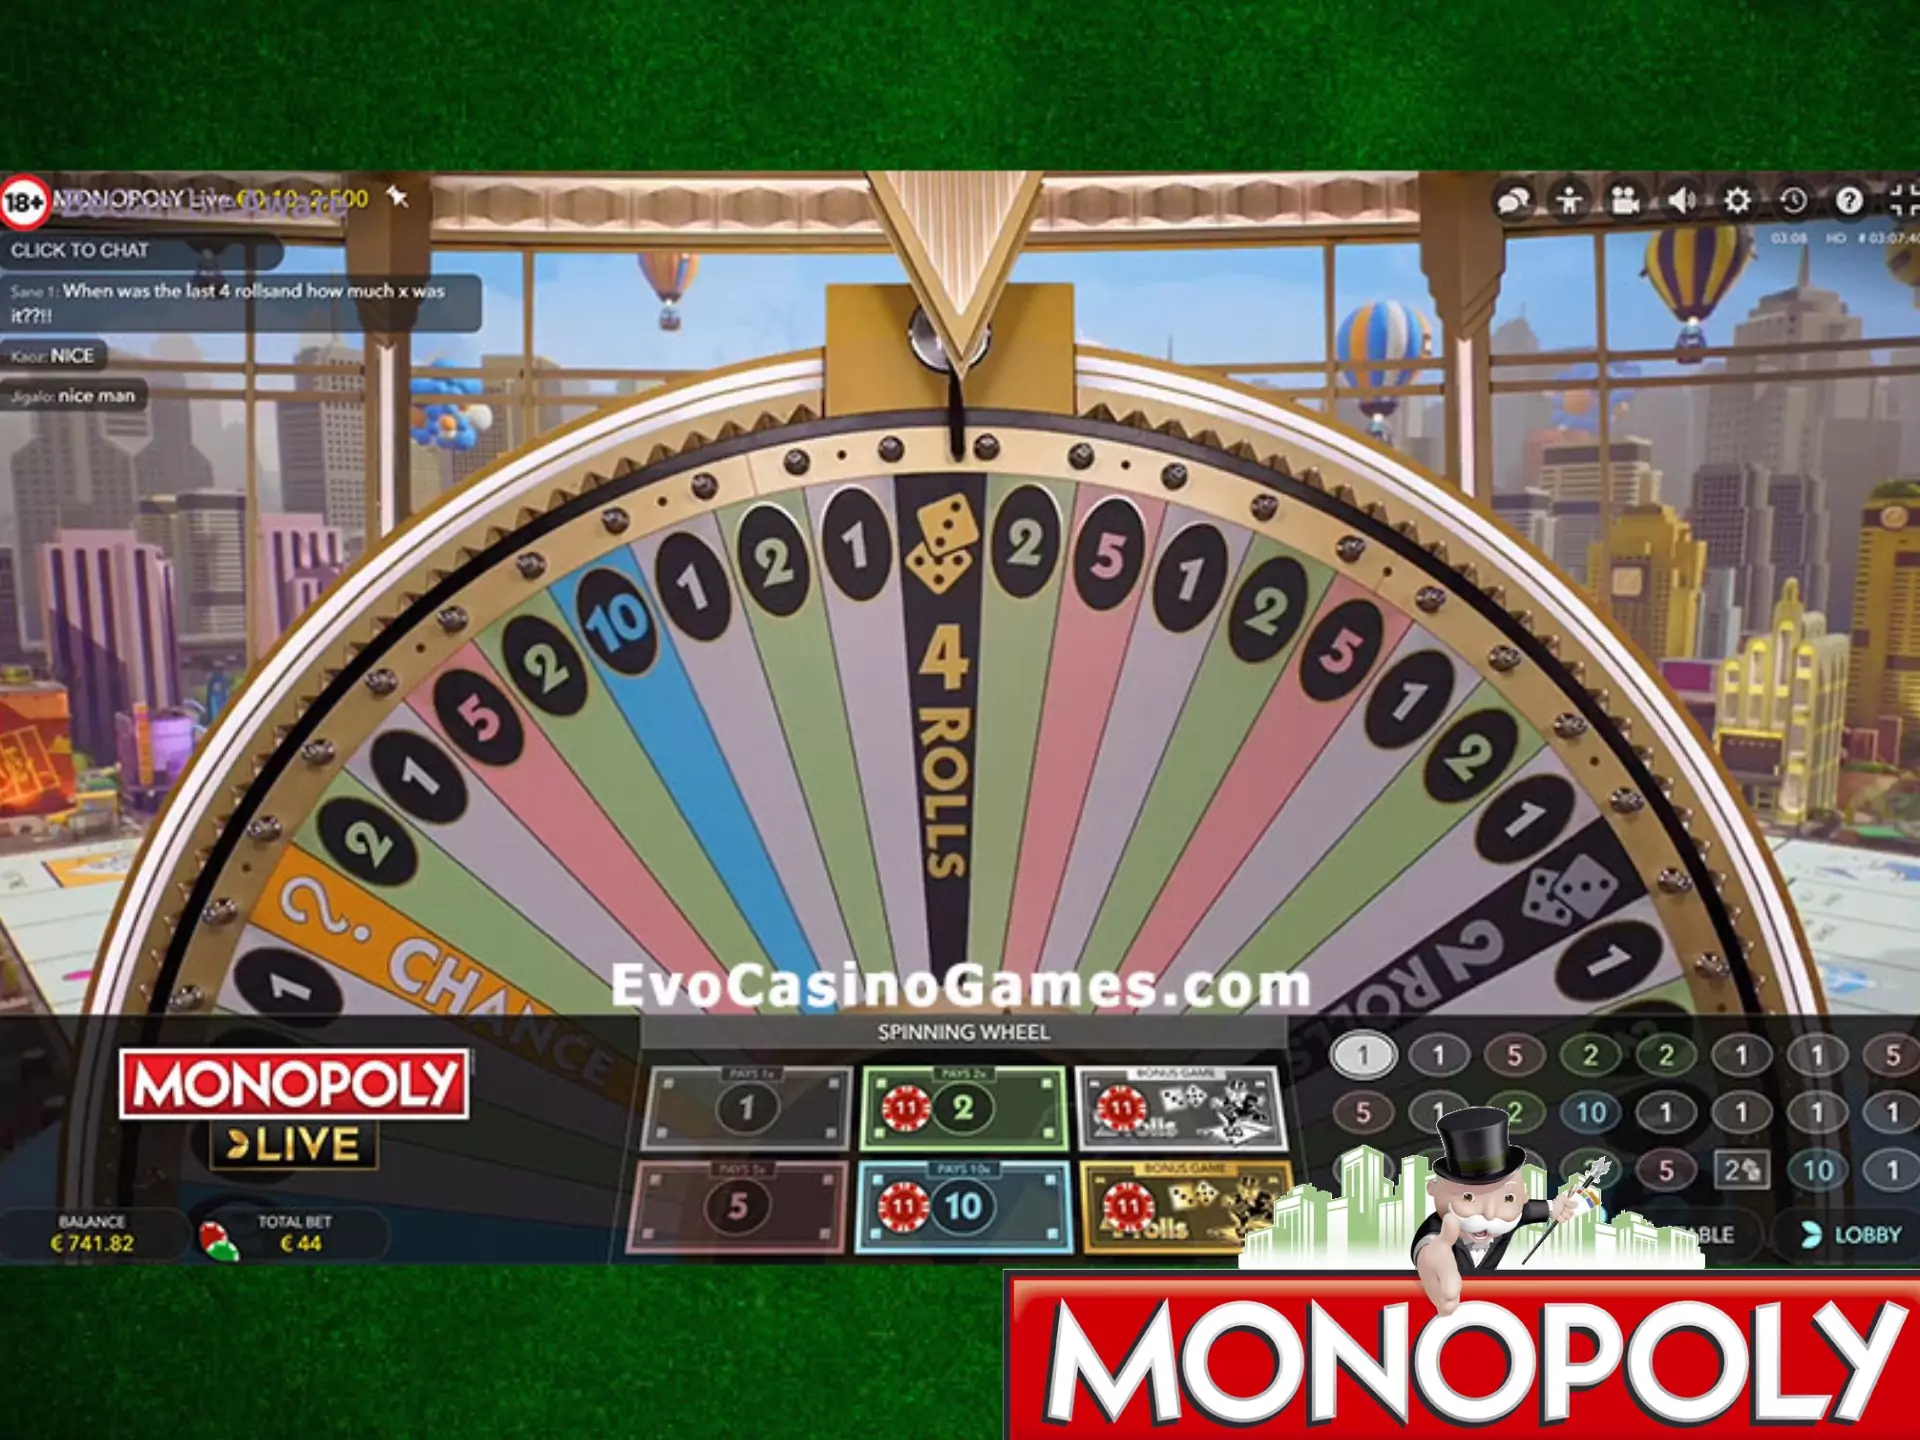 Read our guide and play live monopoly with ease.